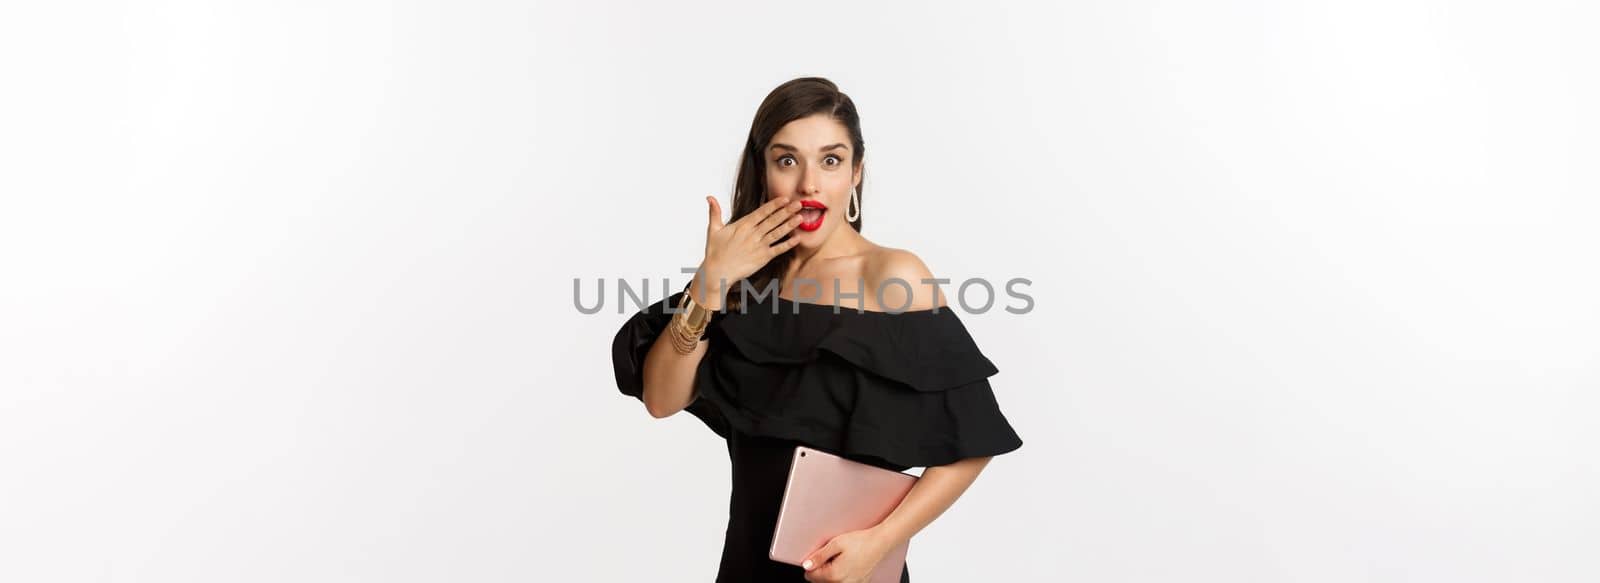 Fashion and shopping concept. Stylish young woman with glamour makeup, wearing black dress, holding digital tablet and looking surprised, white background.